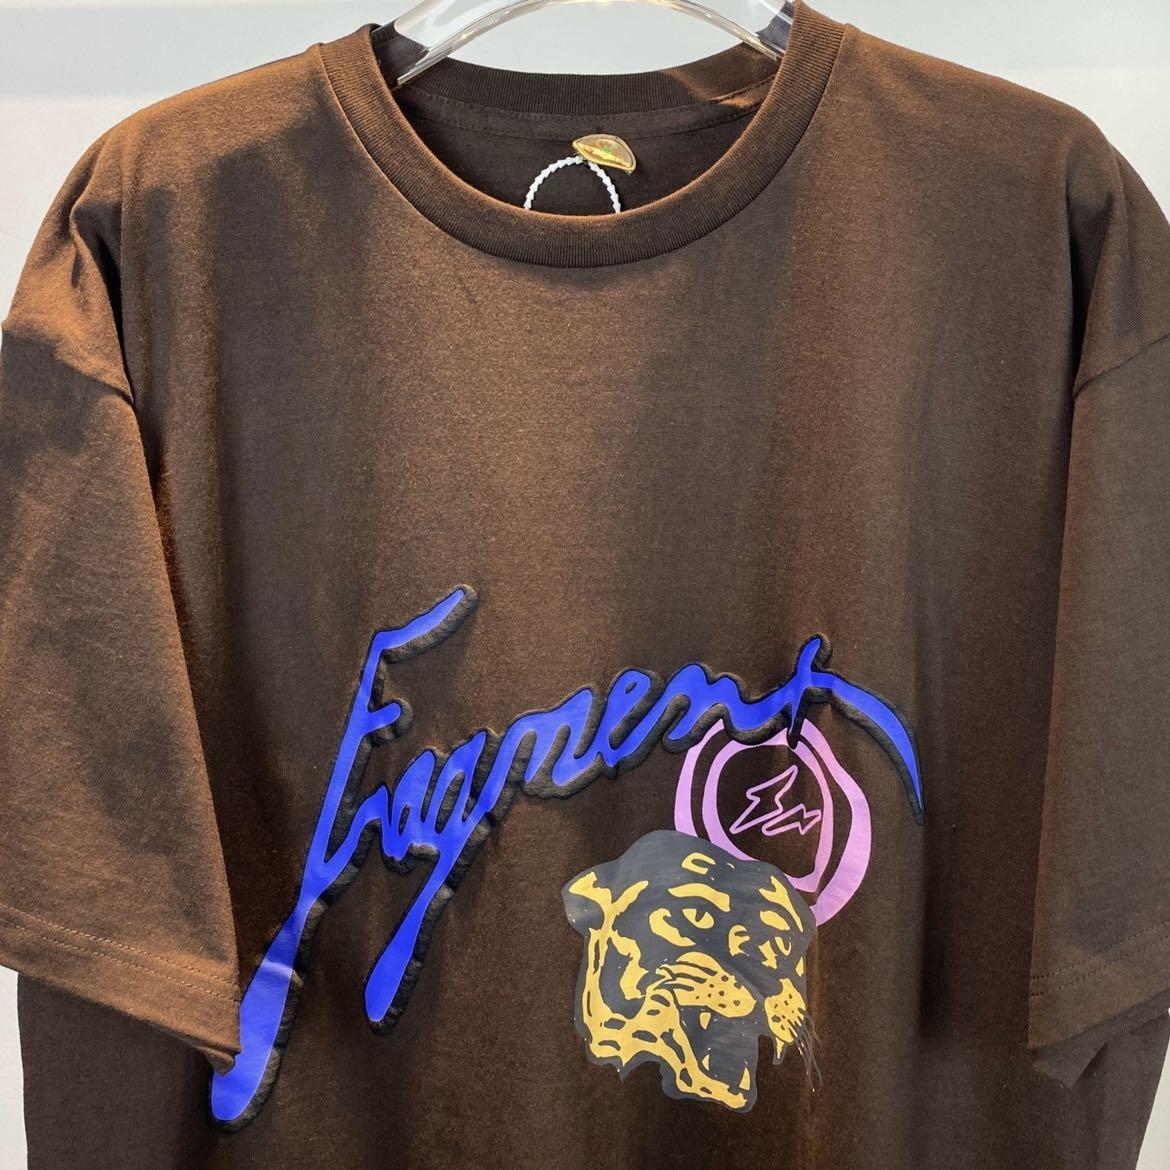 Cactus jack for Fragment Logo tee❌SOLD❌ Size: XL Price: 80 Condition: Brand  New/ E-Receipt